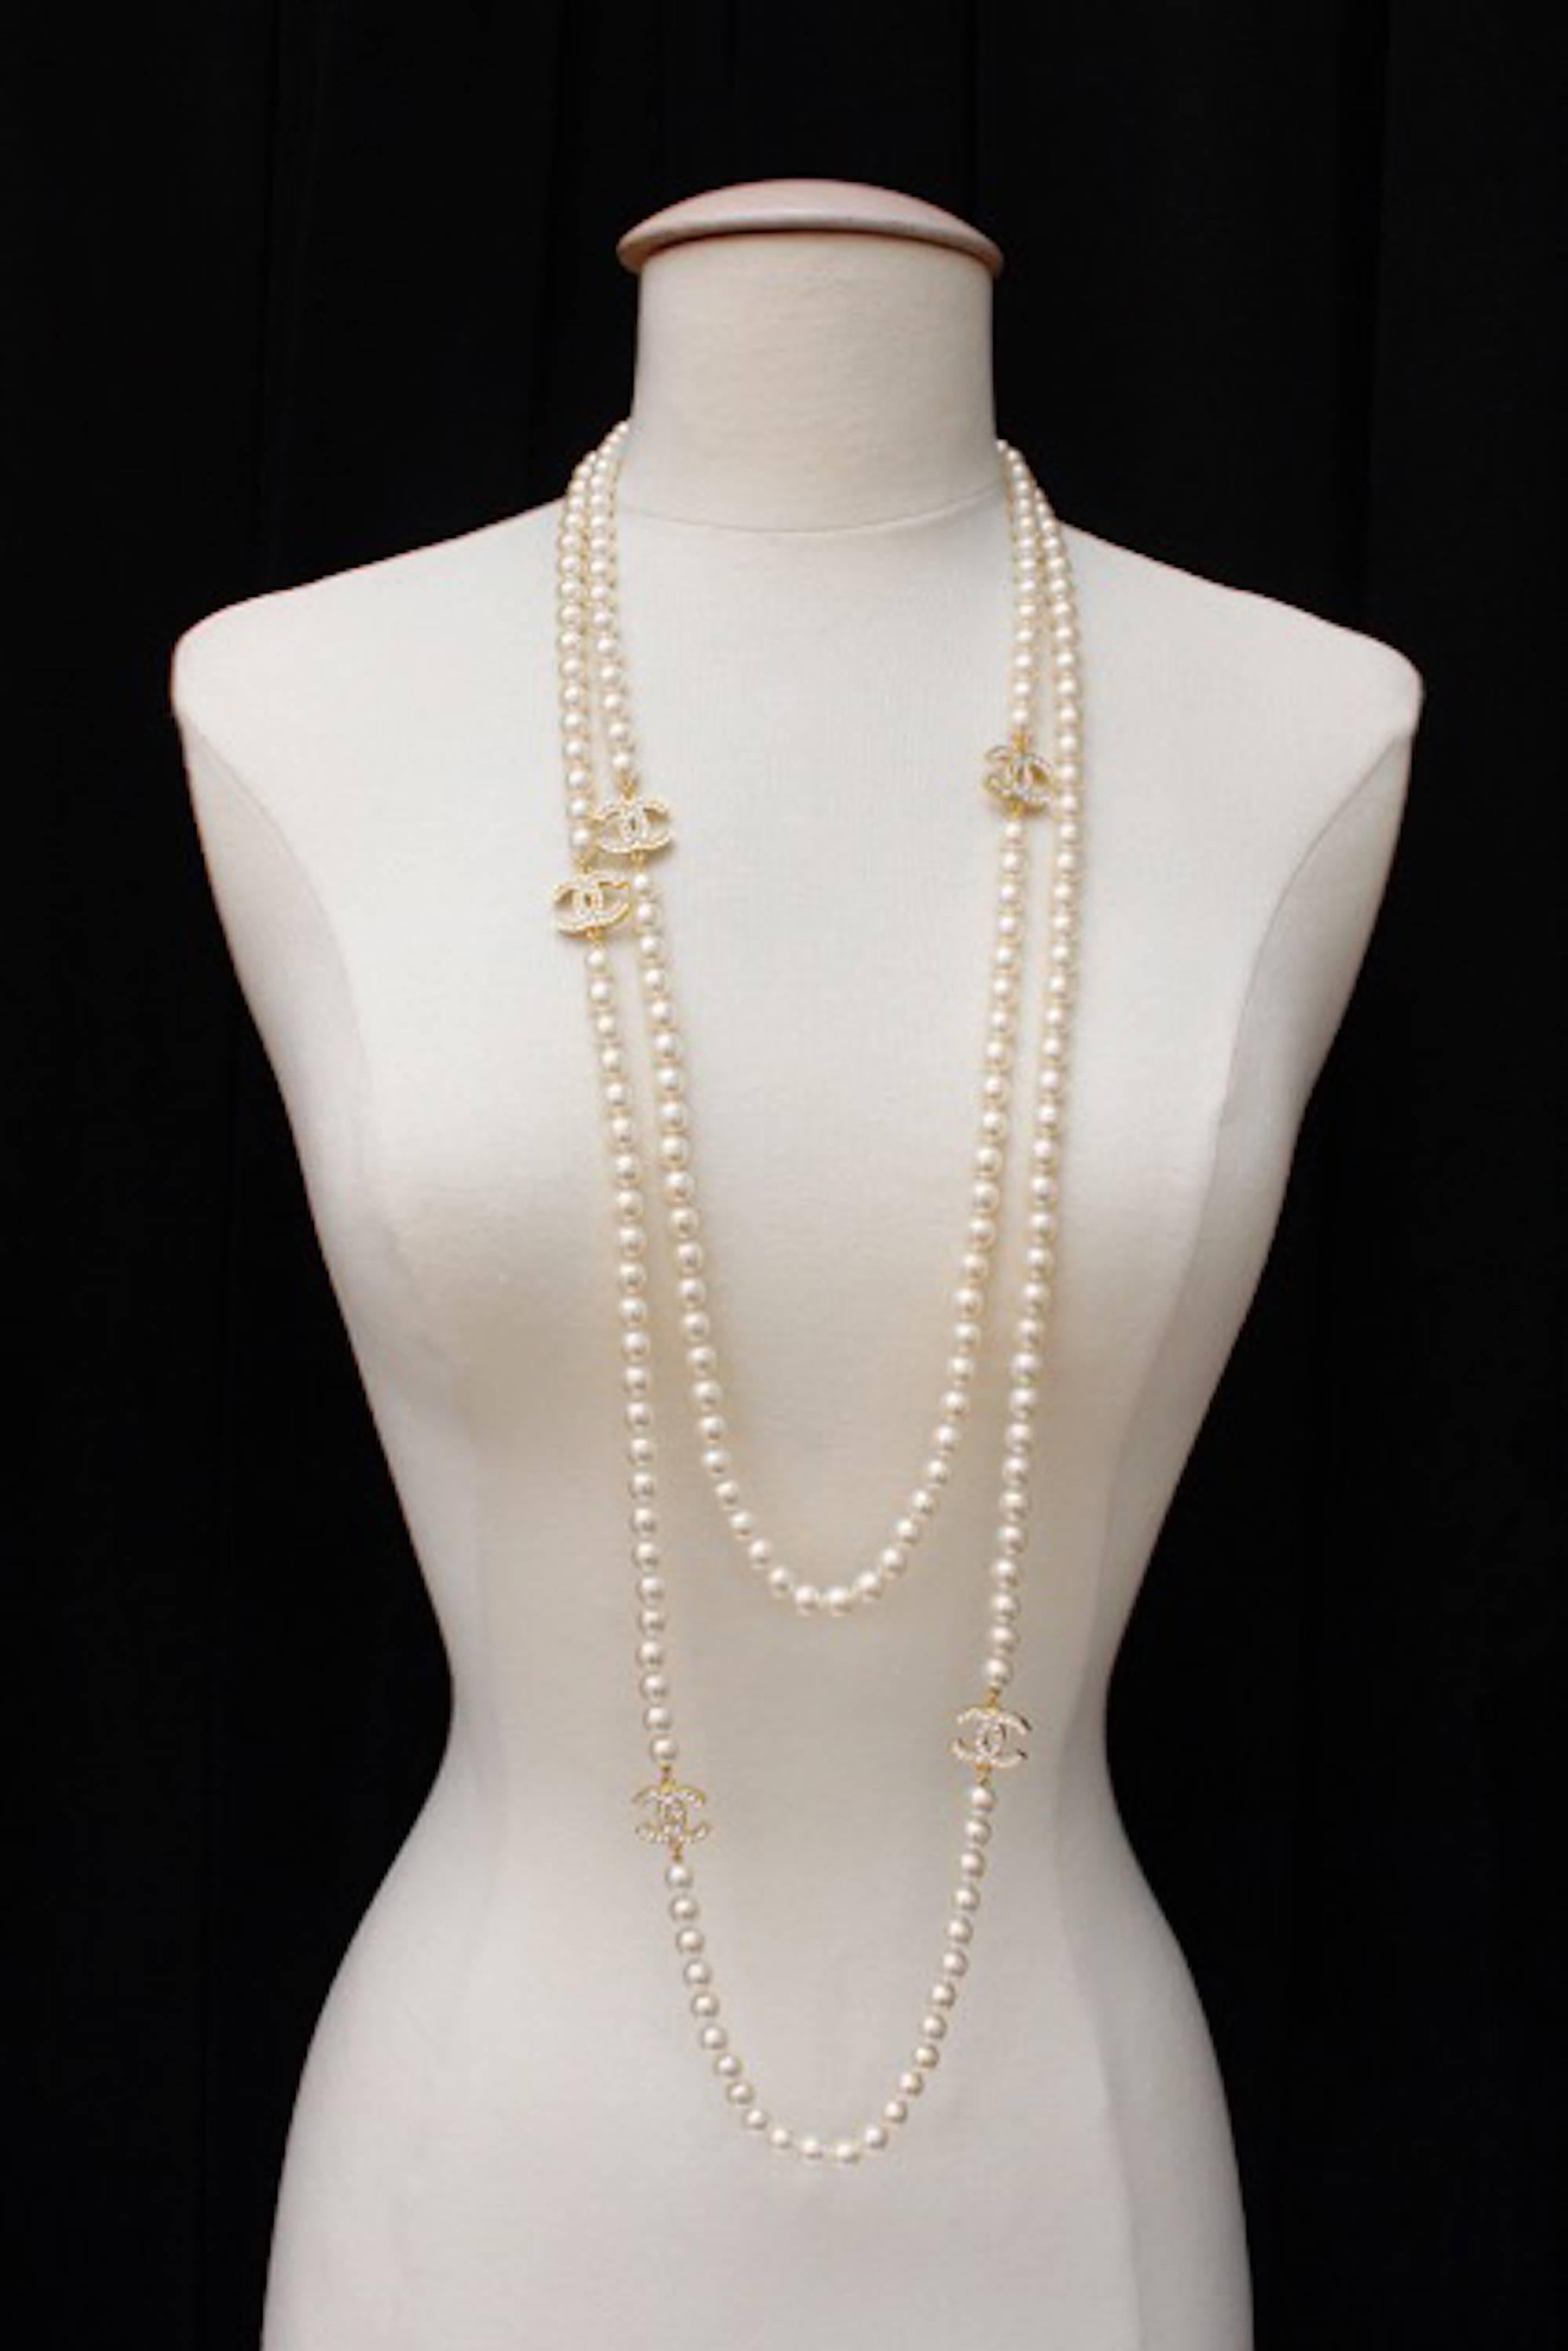 Authentic 2001 Chanel glass pearl extra long sautoir necklace with five alternating Swarovski crystal encrusted CC logos set in gold tone metal. Lobster claw clasp closure bearing the Chanel cartouche, stamped "Chanel 01A." In excellent